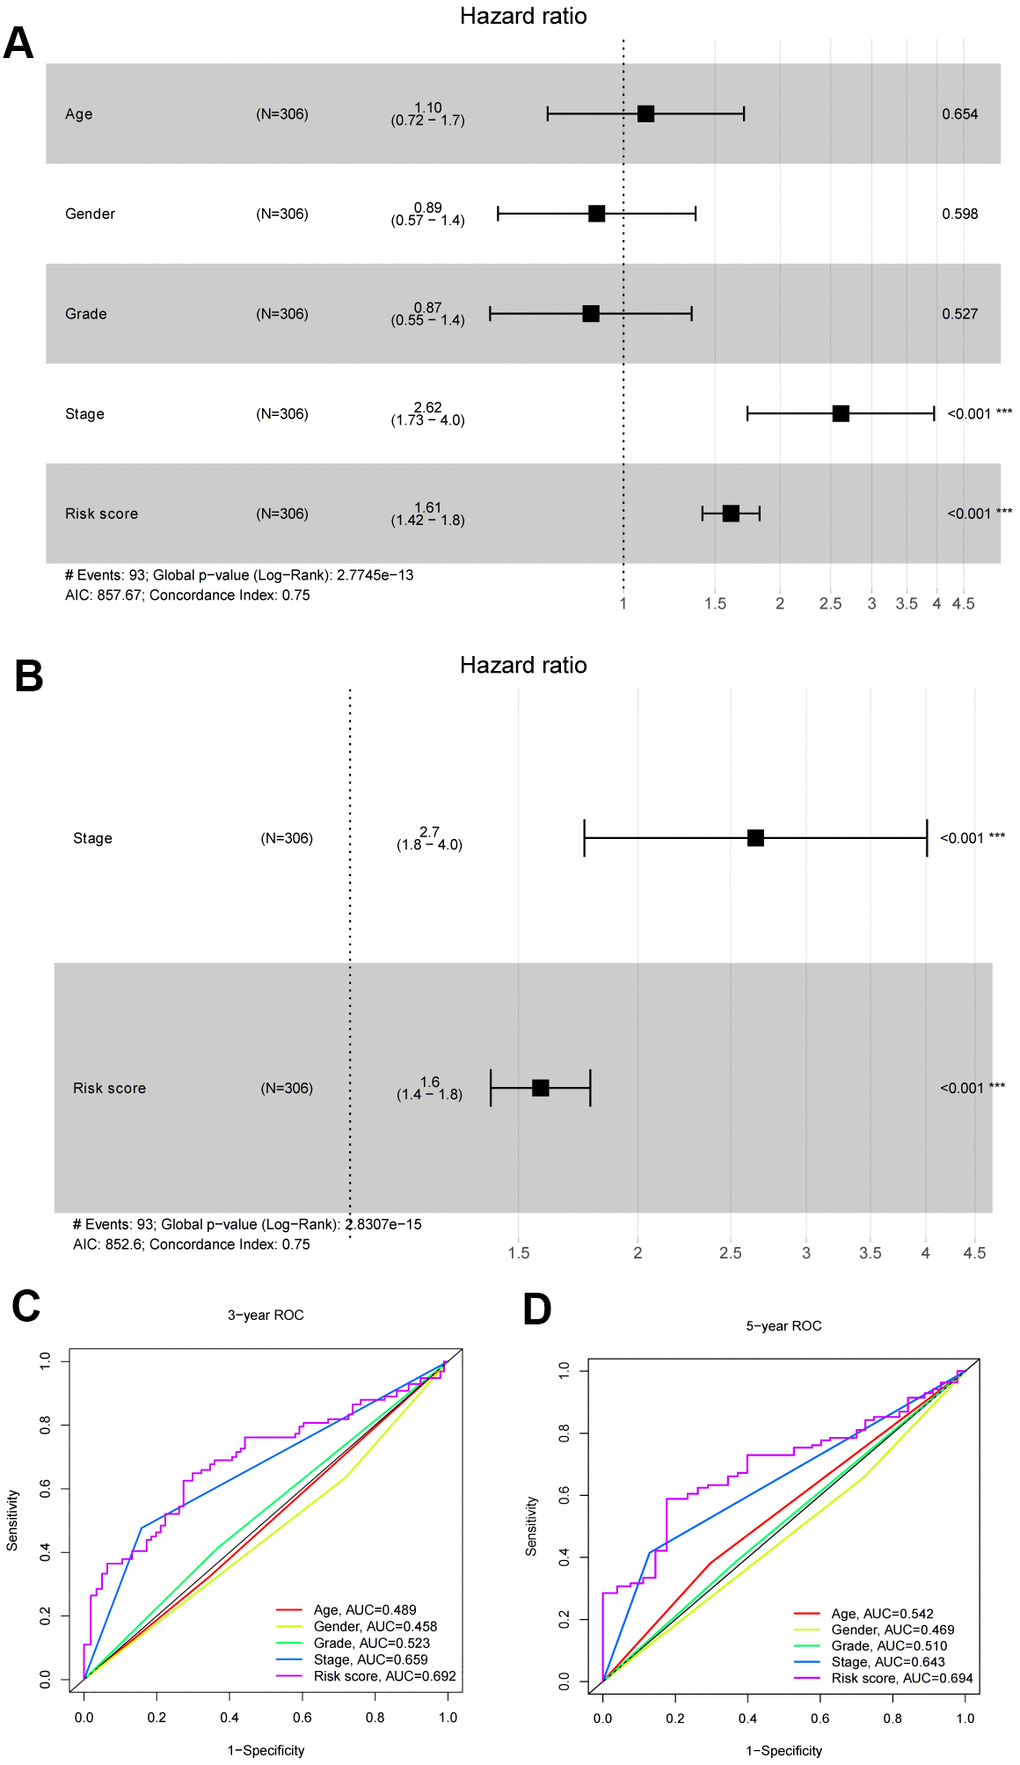 Identification independent prognostic parameters in HCC patients. (A, B) The univariate and multivariate Cox regression analysis of clinical parameters in patients with HCC. (C, D) ROC curves of risk score and clinical characteristics predicting 3- and 5-year survival in HCC patients.